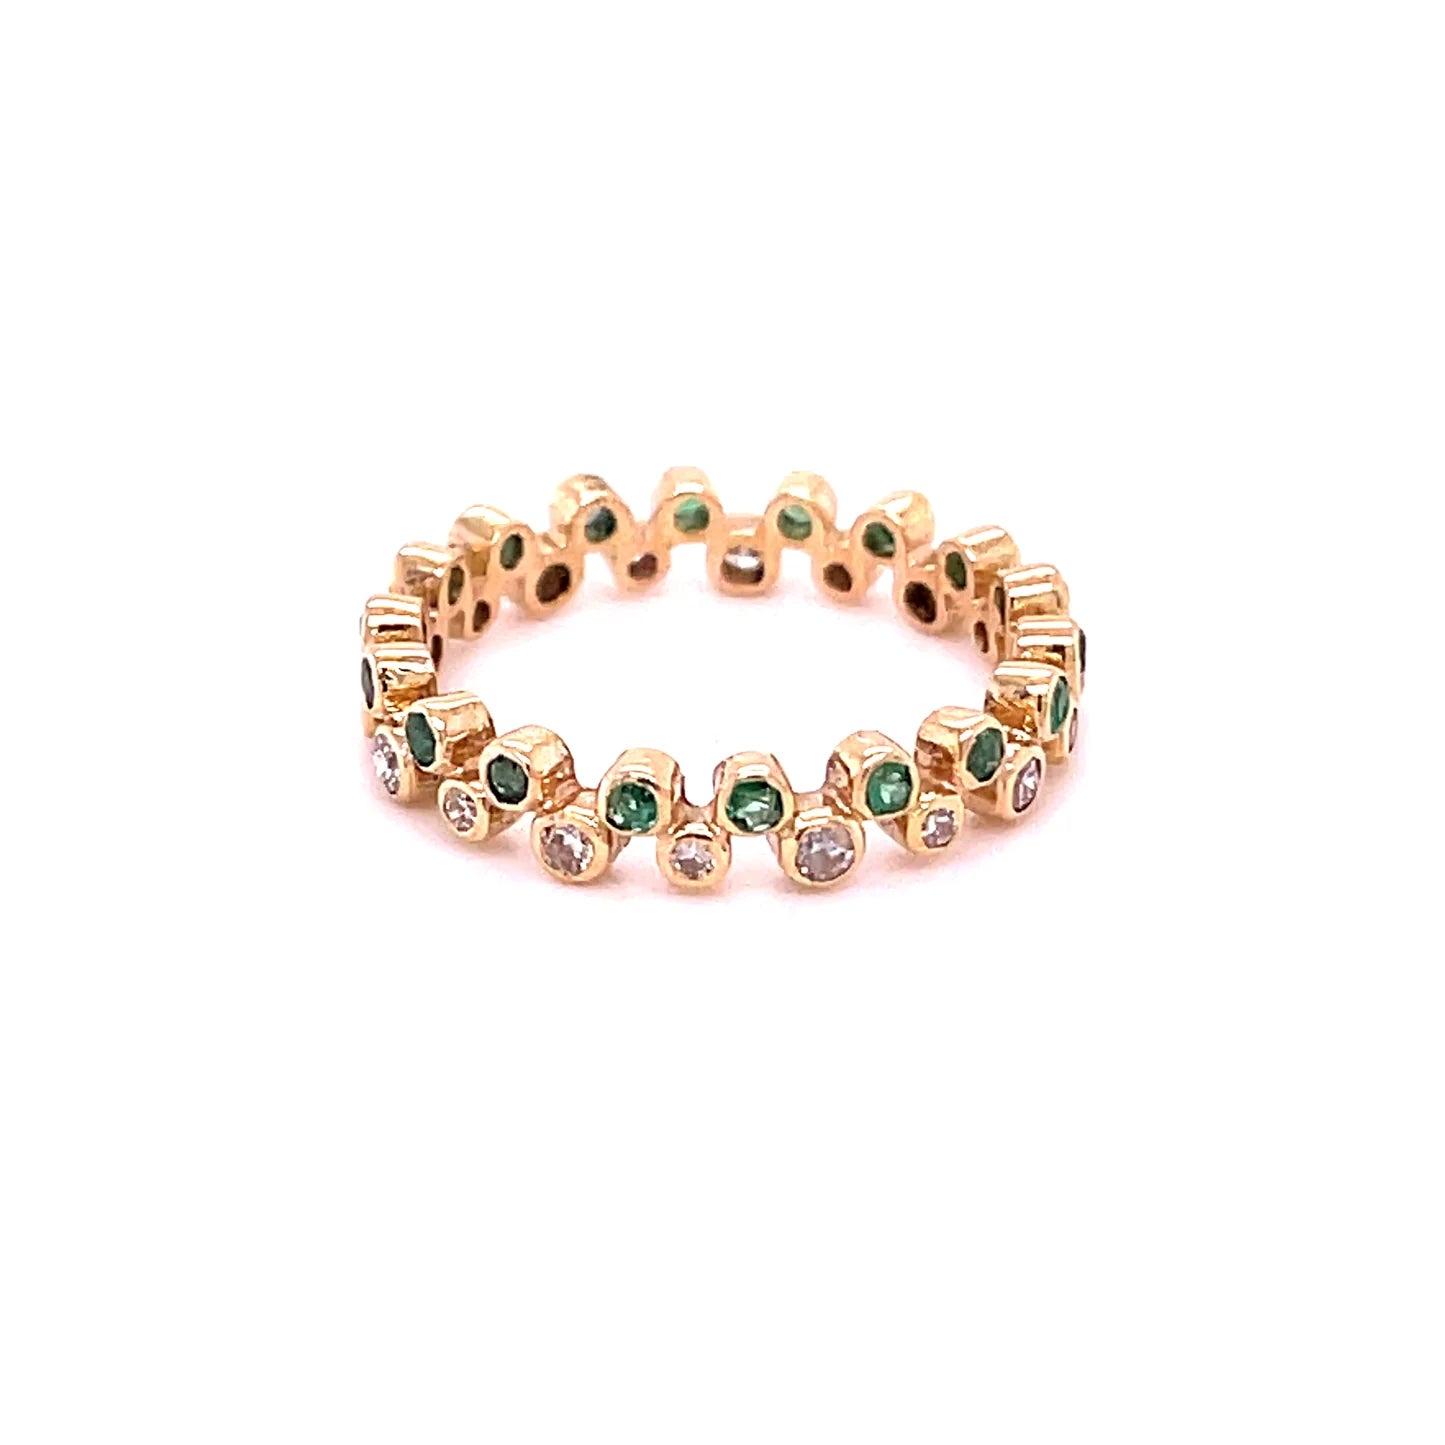 14kt Gold Emerald Ring With Diamonds